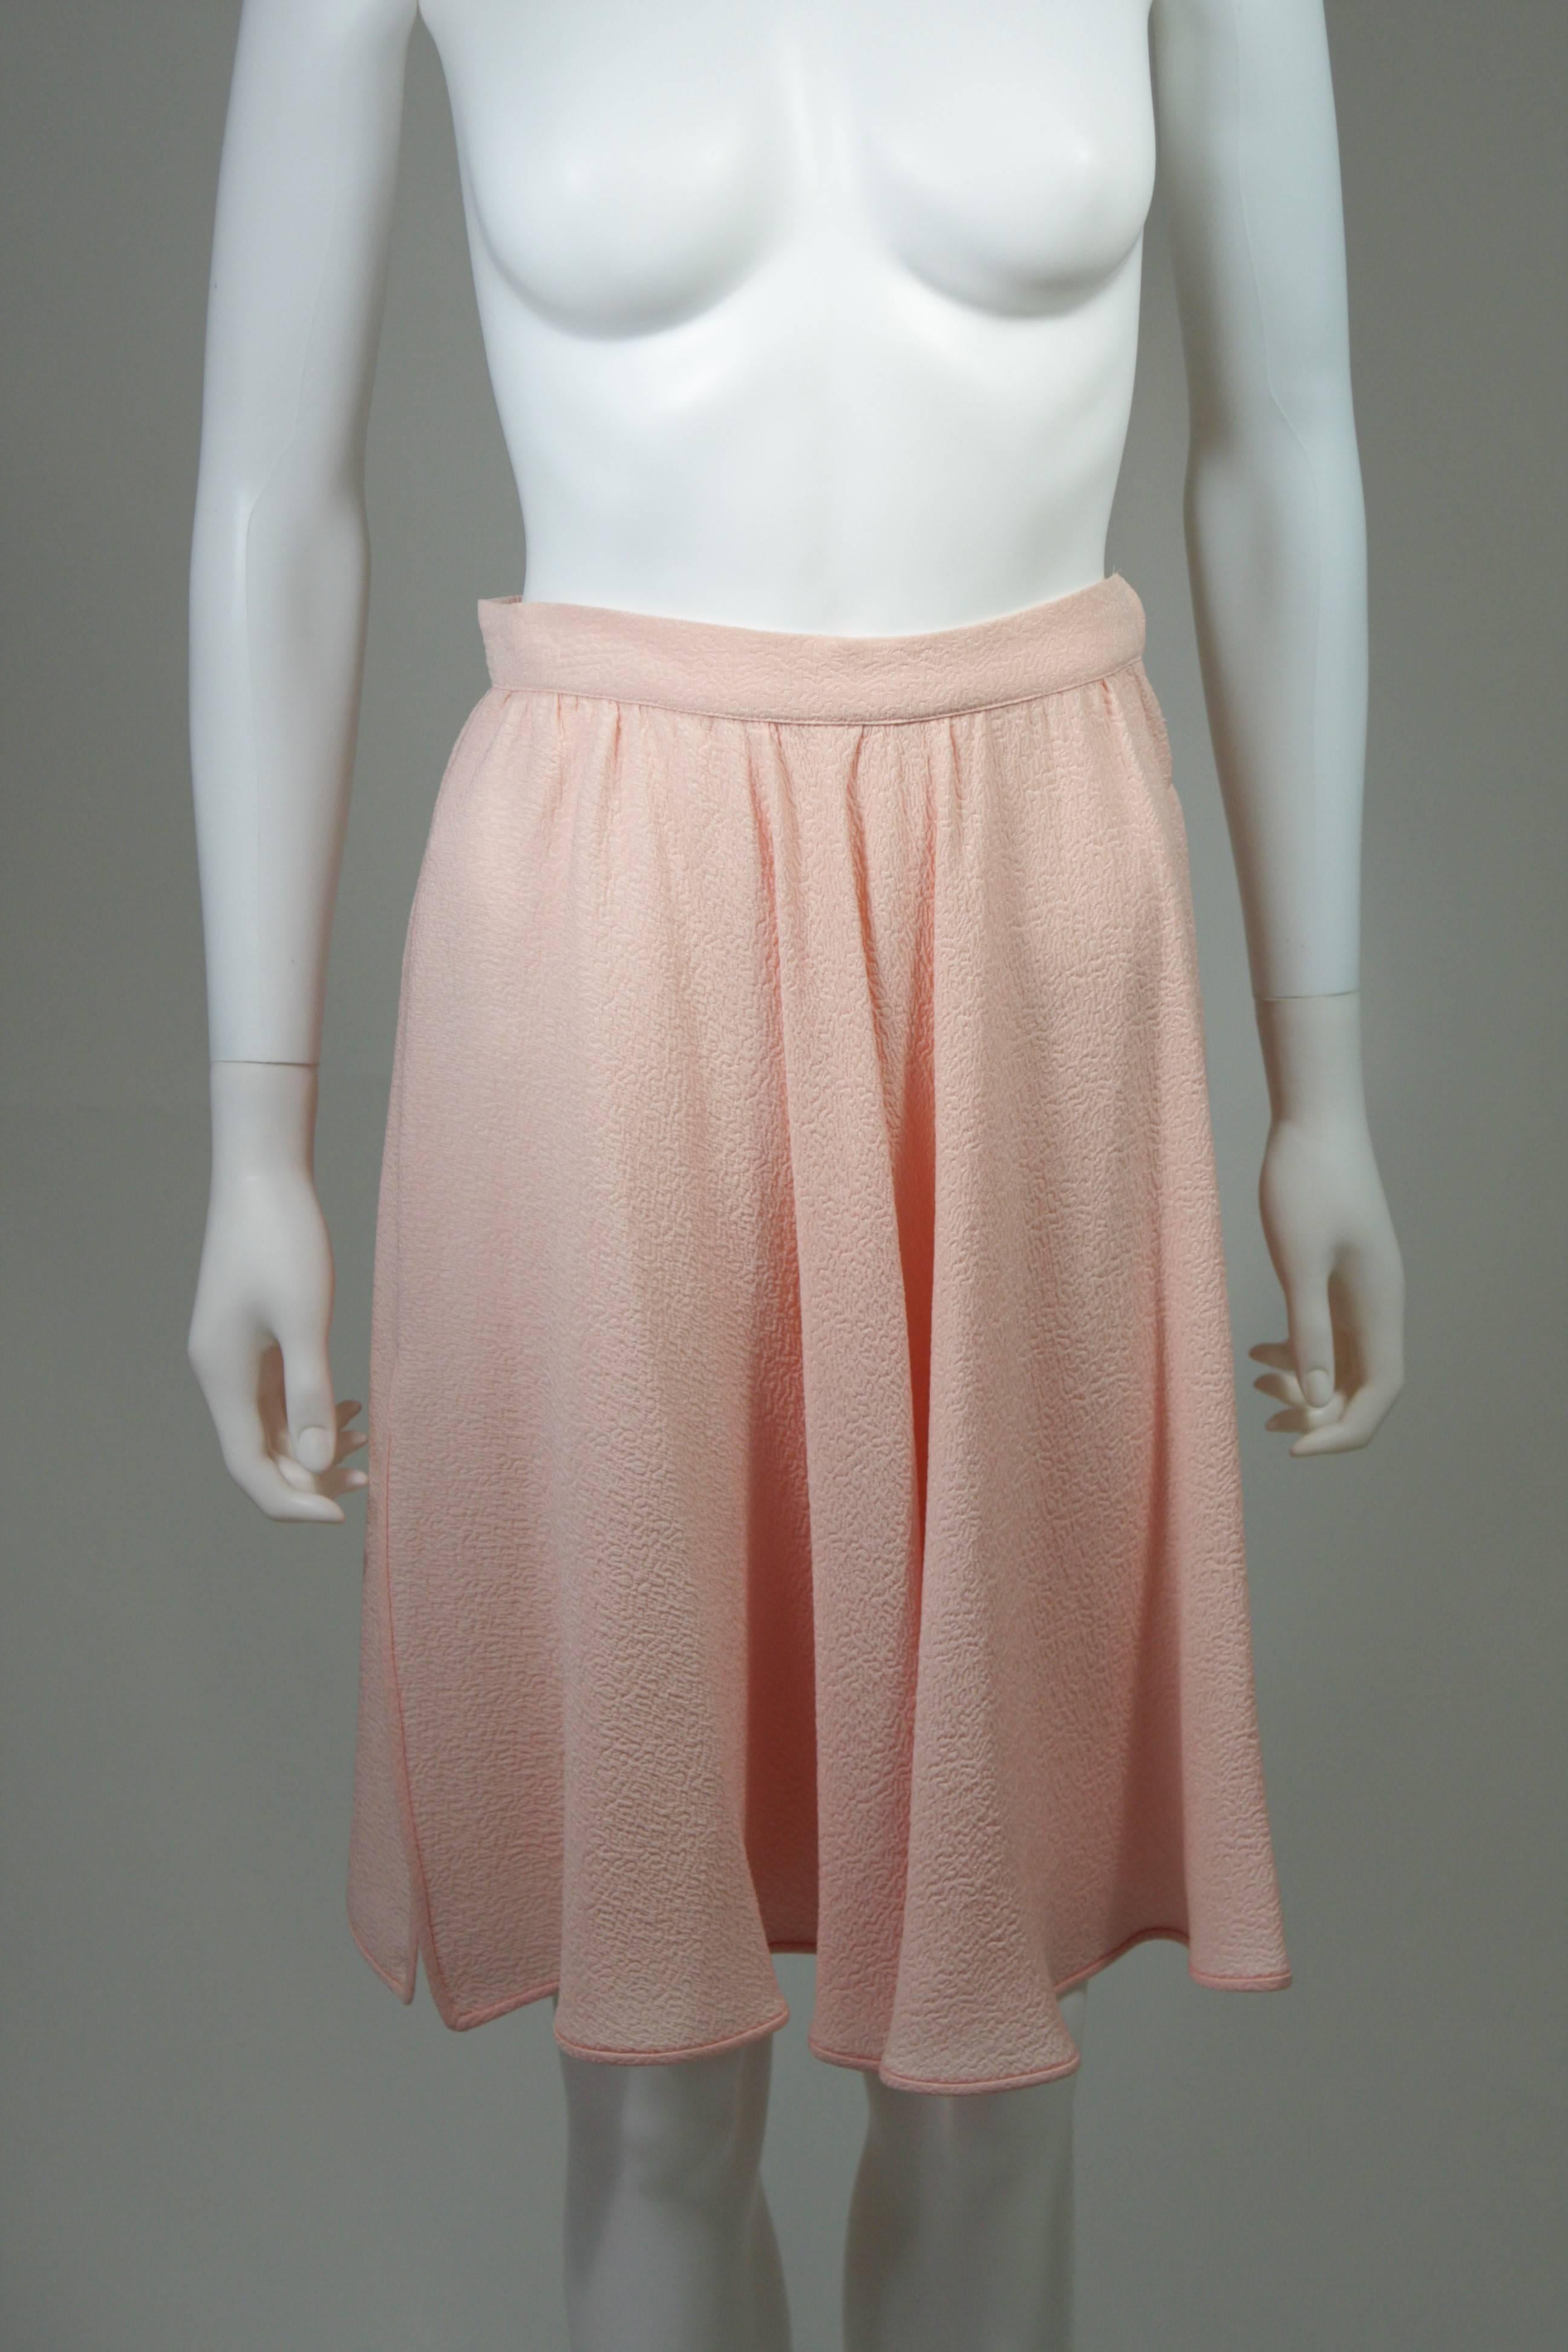 Valentino Pleated Pink Silk Skirt Ensemble Size 6 8  For Sale 3